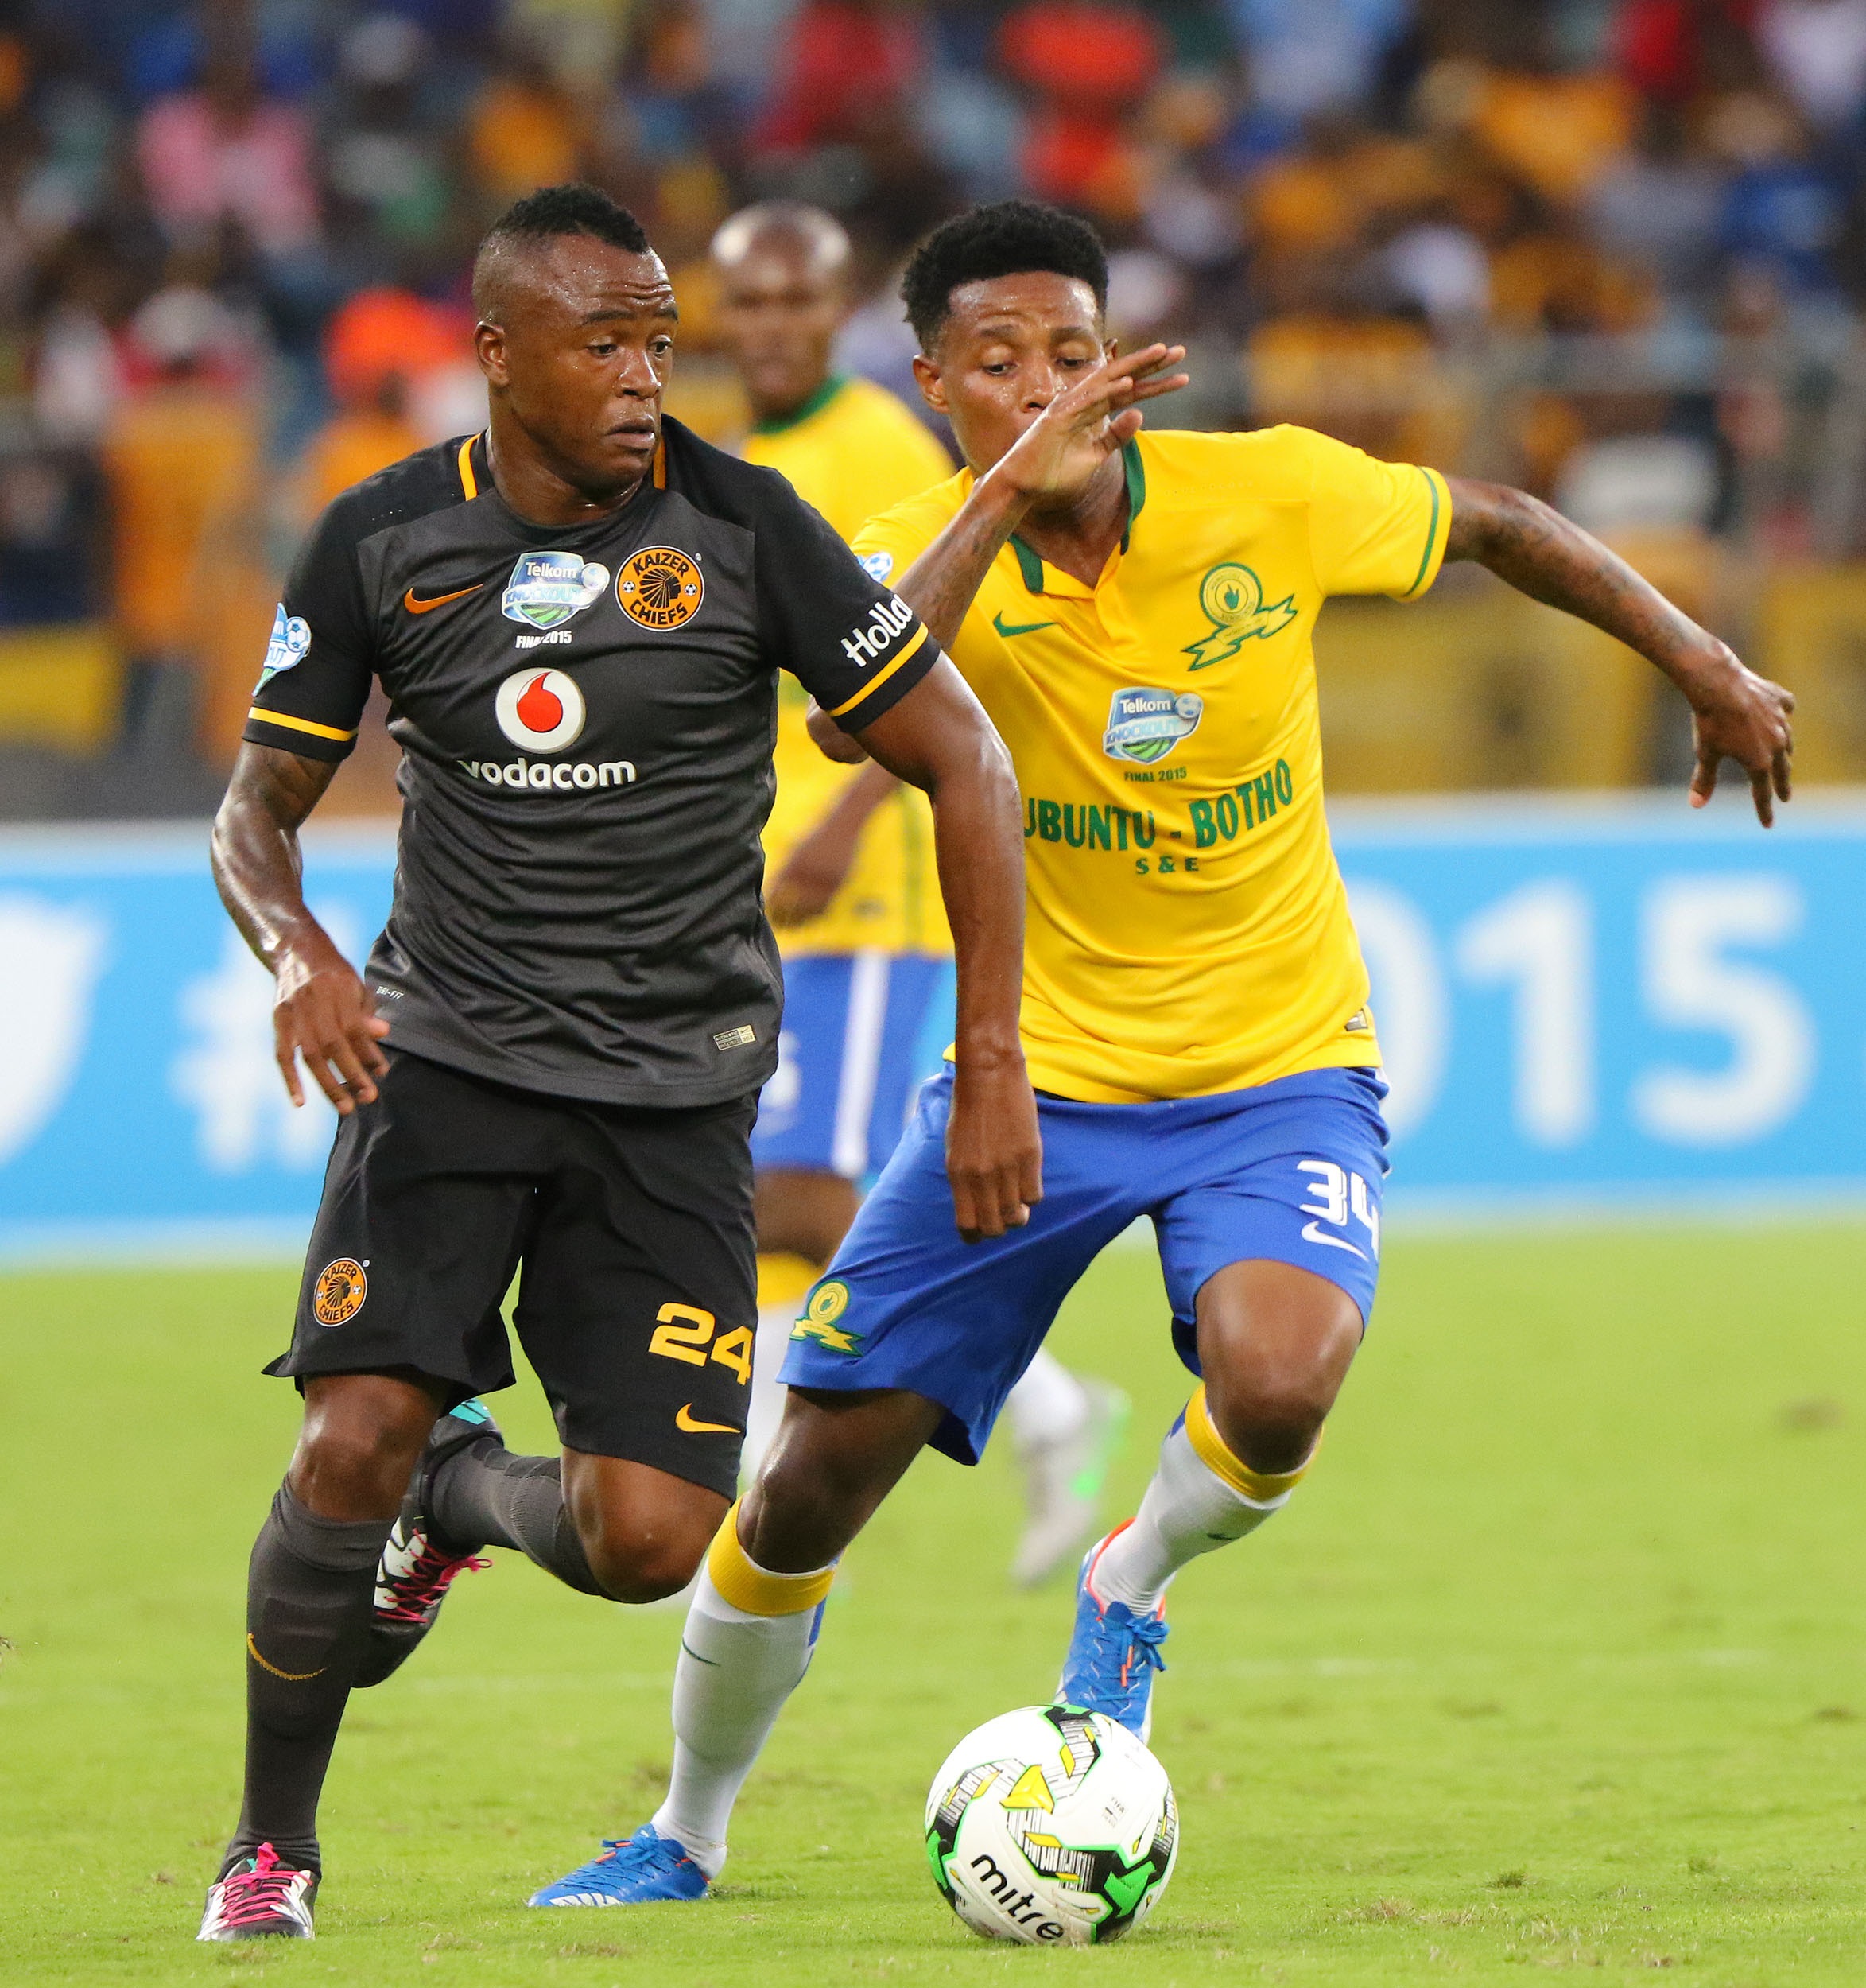 'No, I'm not selling' - Masilela reveals who stopped his move to Sundowns